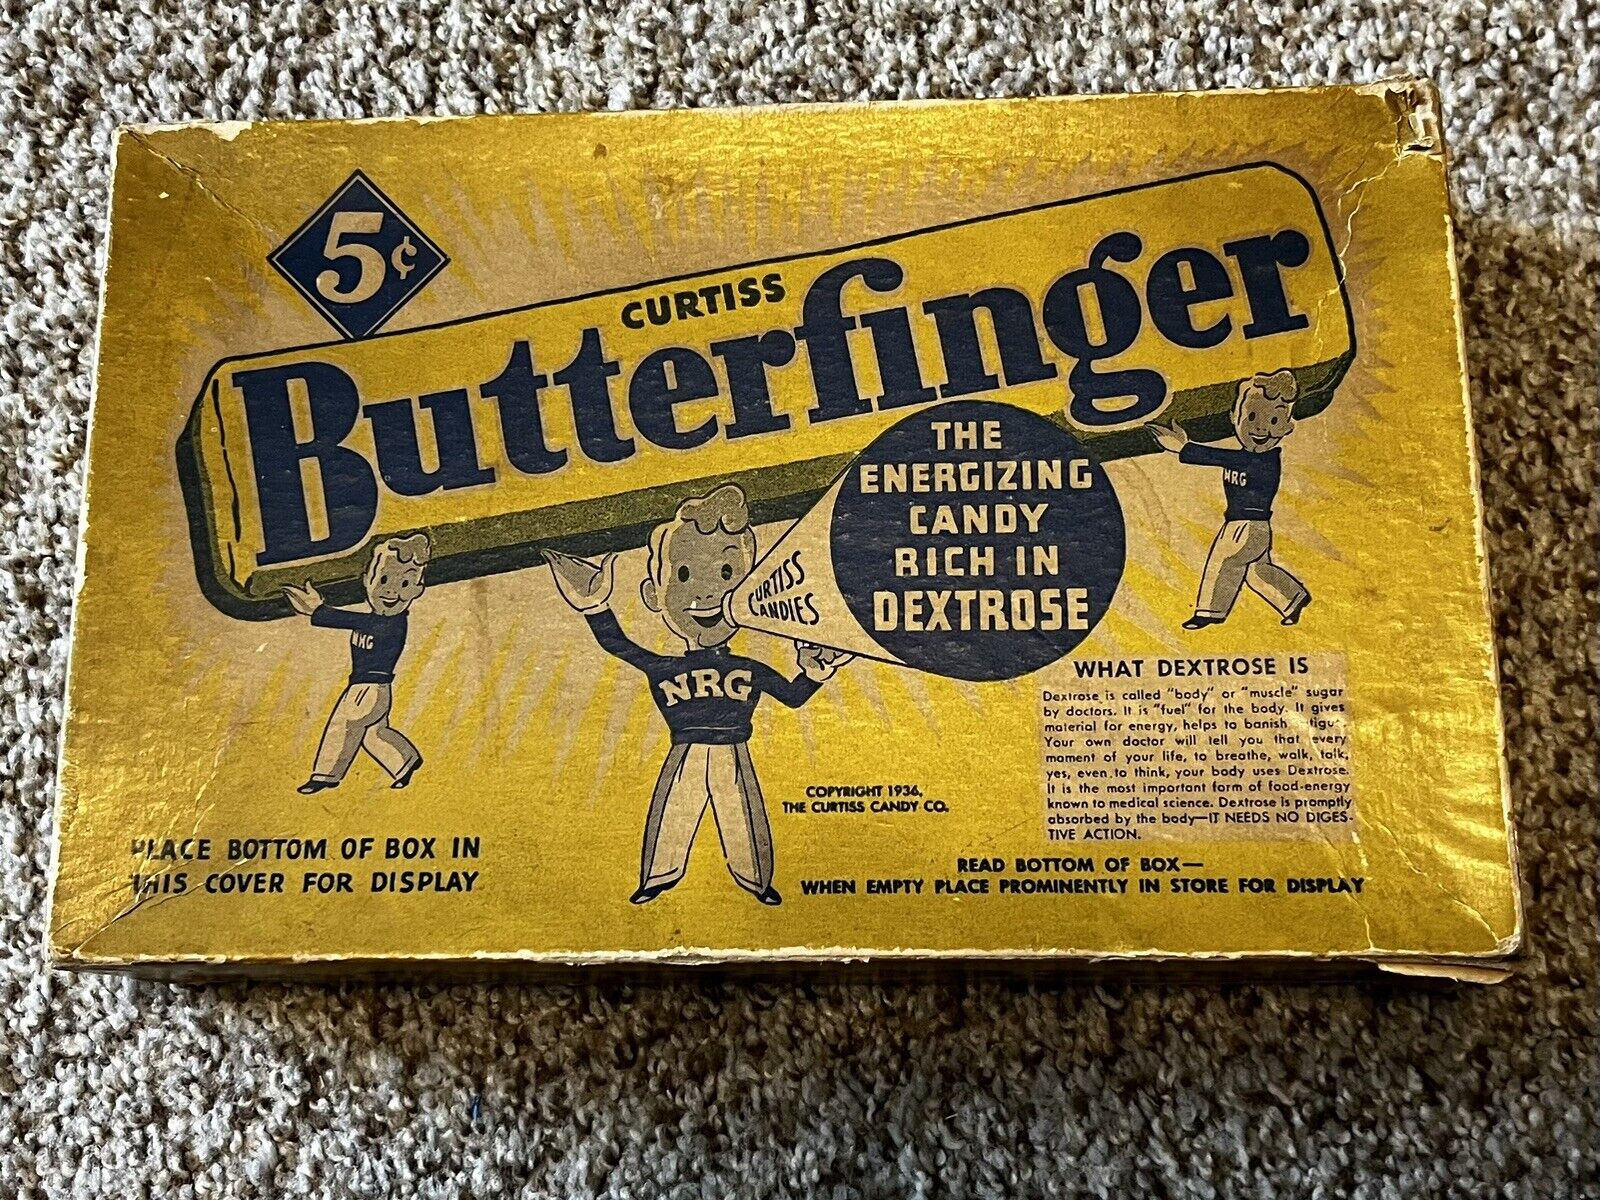 1936 Butterfinger Candy Box, Baby Ruth Curtis Boy Advertising. Nice Cond. 11”